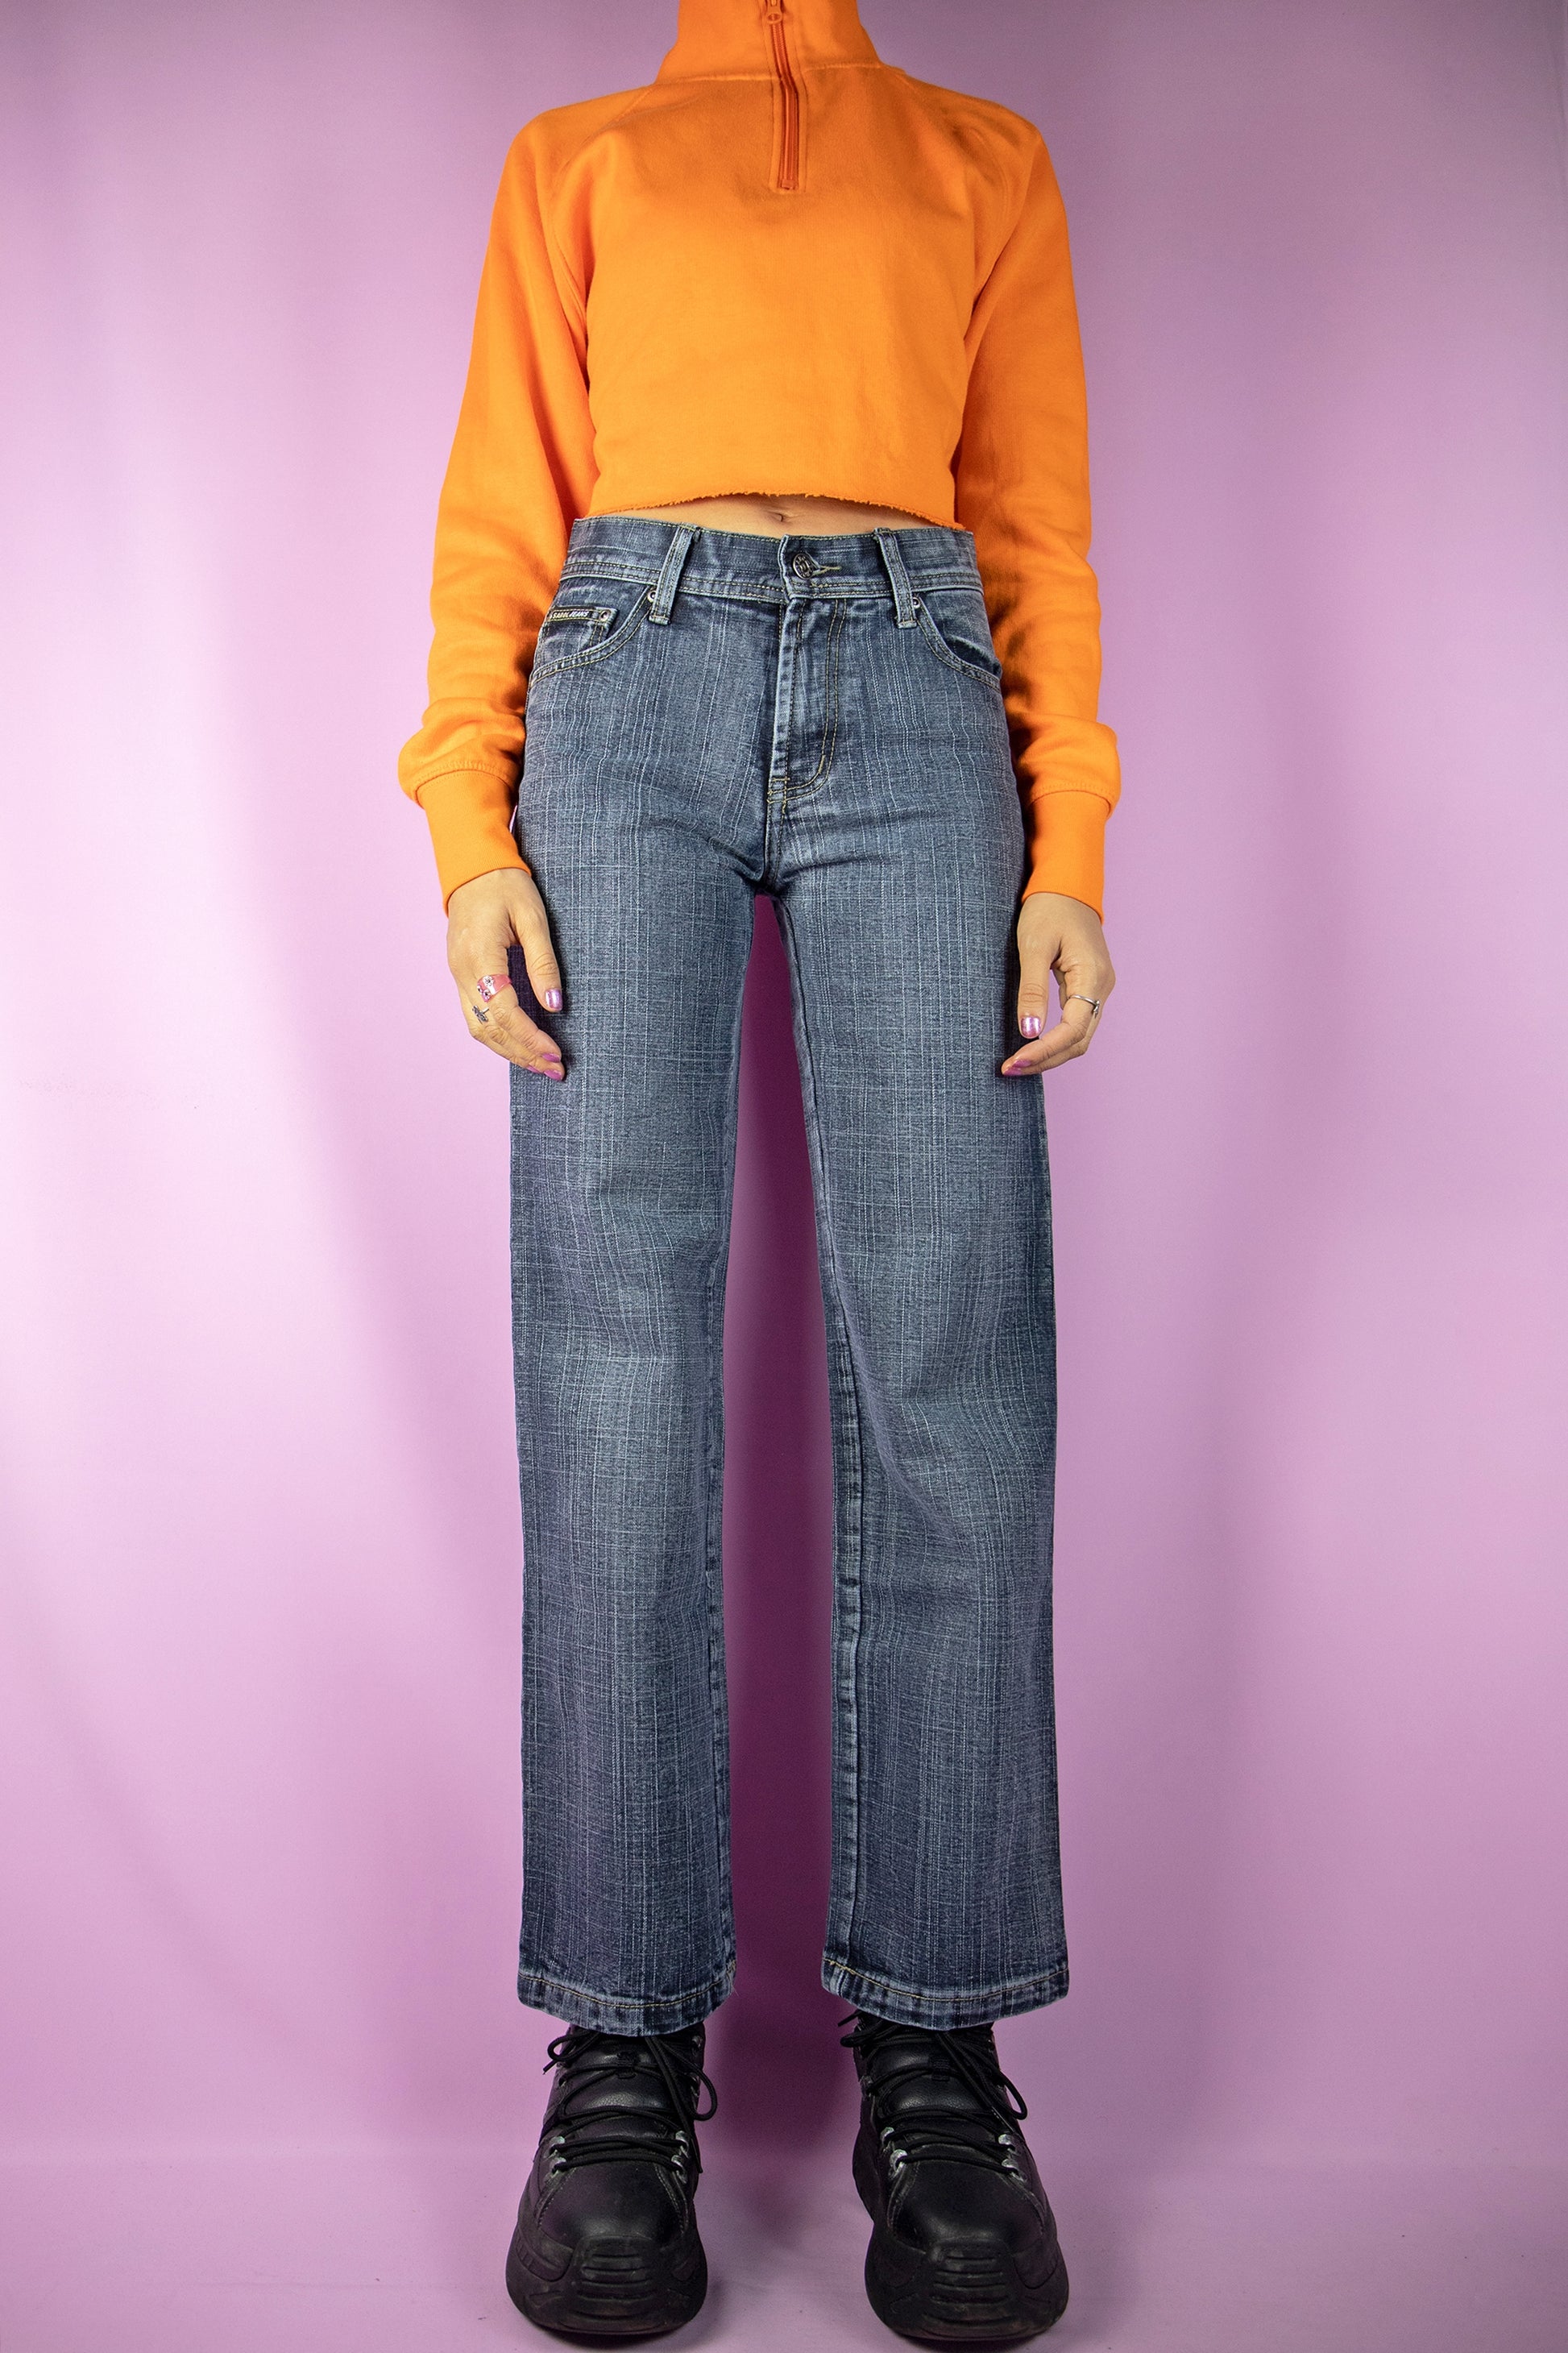 The Y2K Mid Rise Wide Jeans are dark wash mid-rise wide-leg pants. Cyber grunge gorpcore 2000s denim trousers.